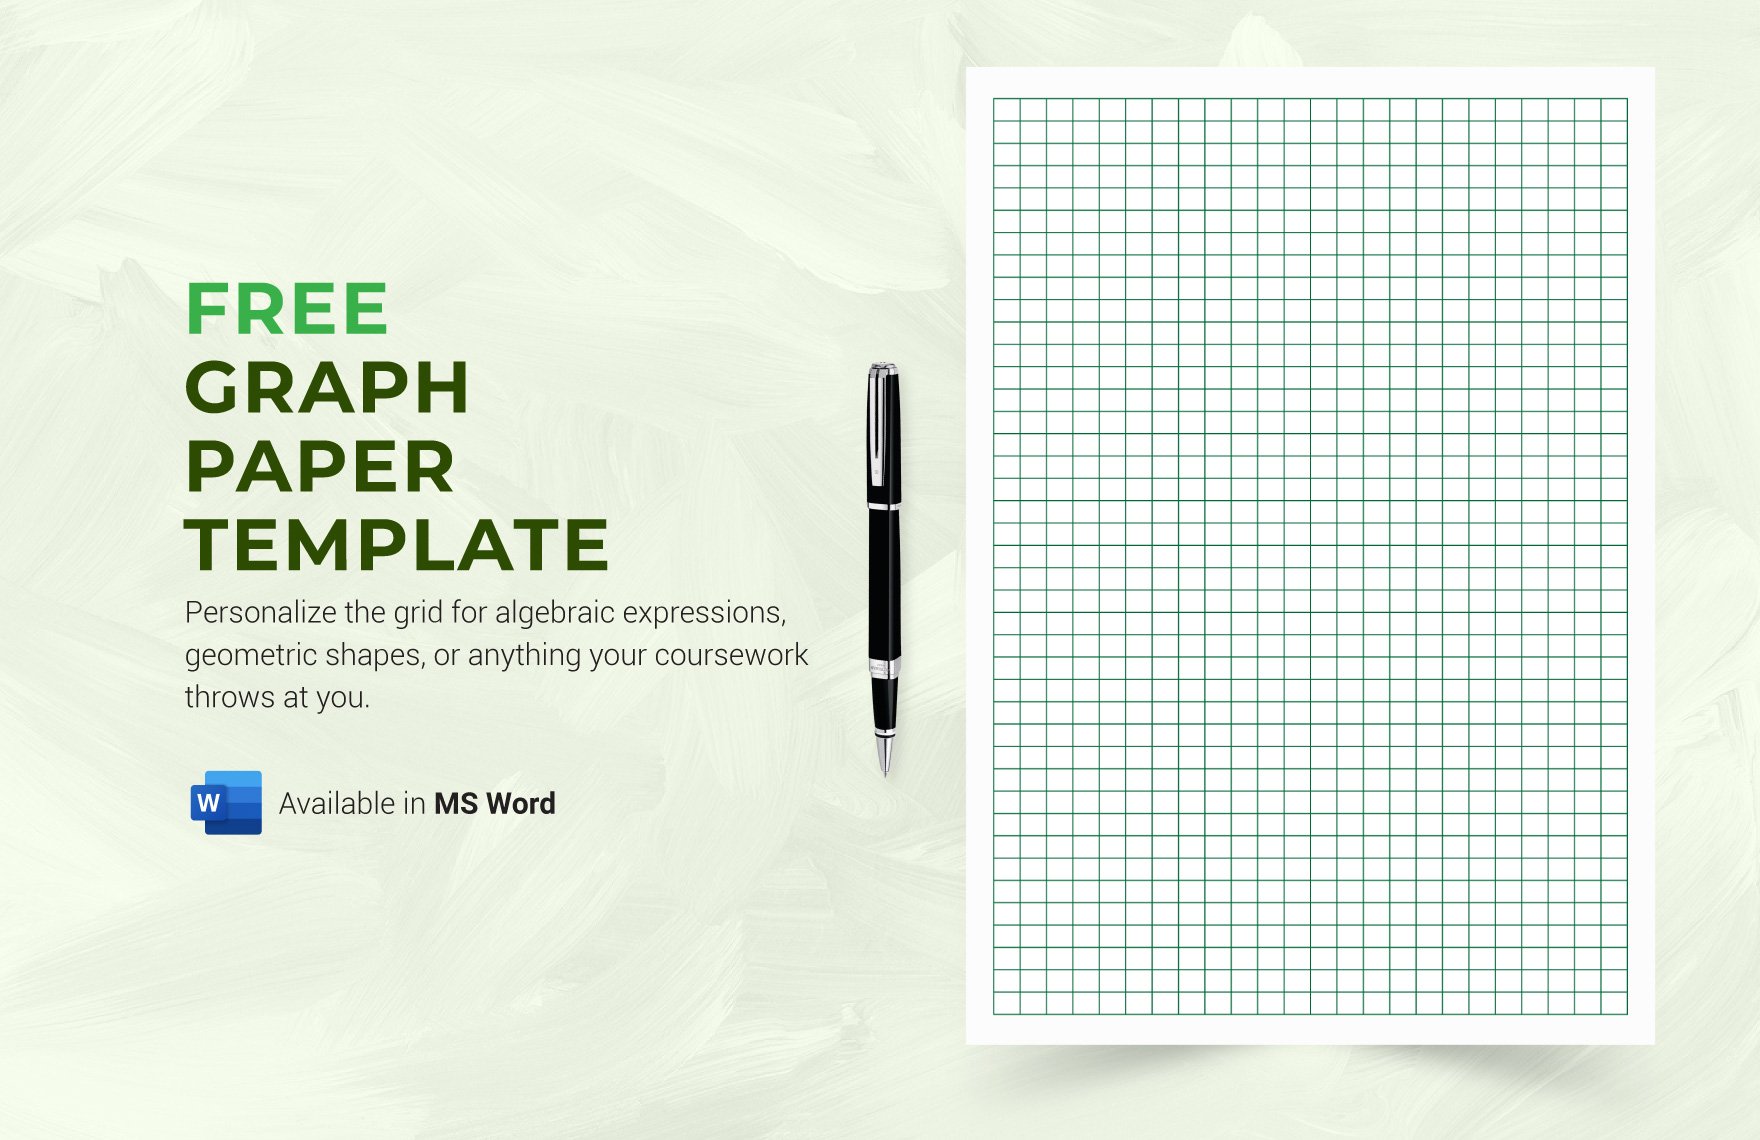 Free Graph Paper Template in Word